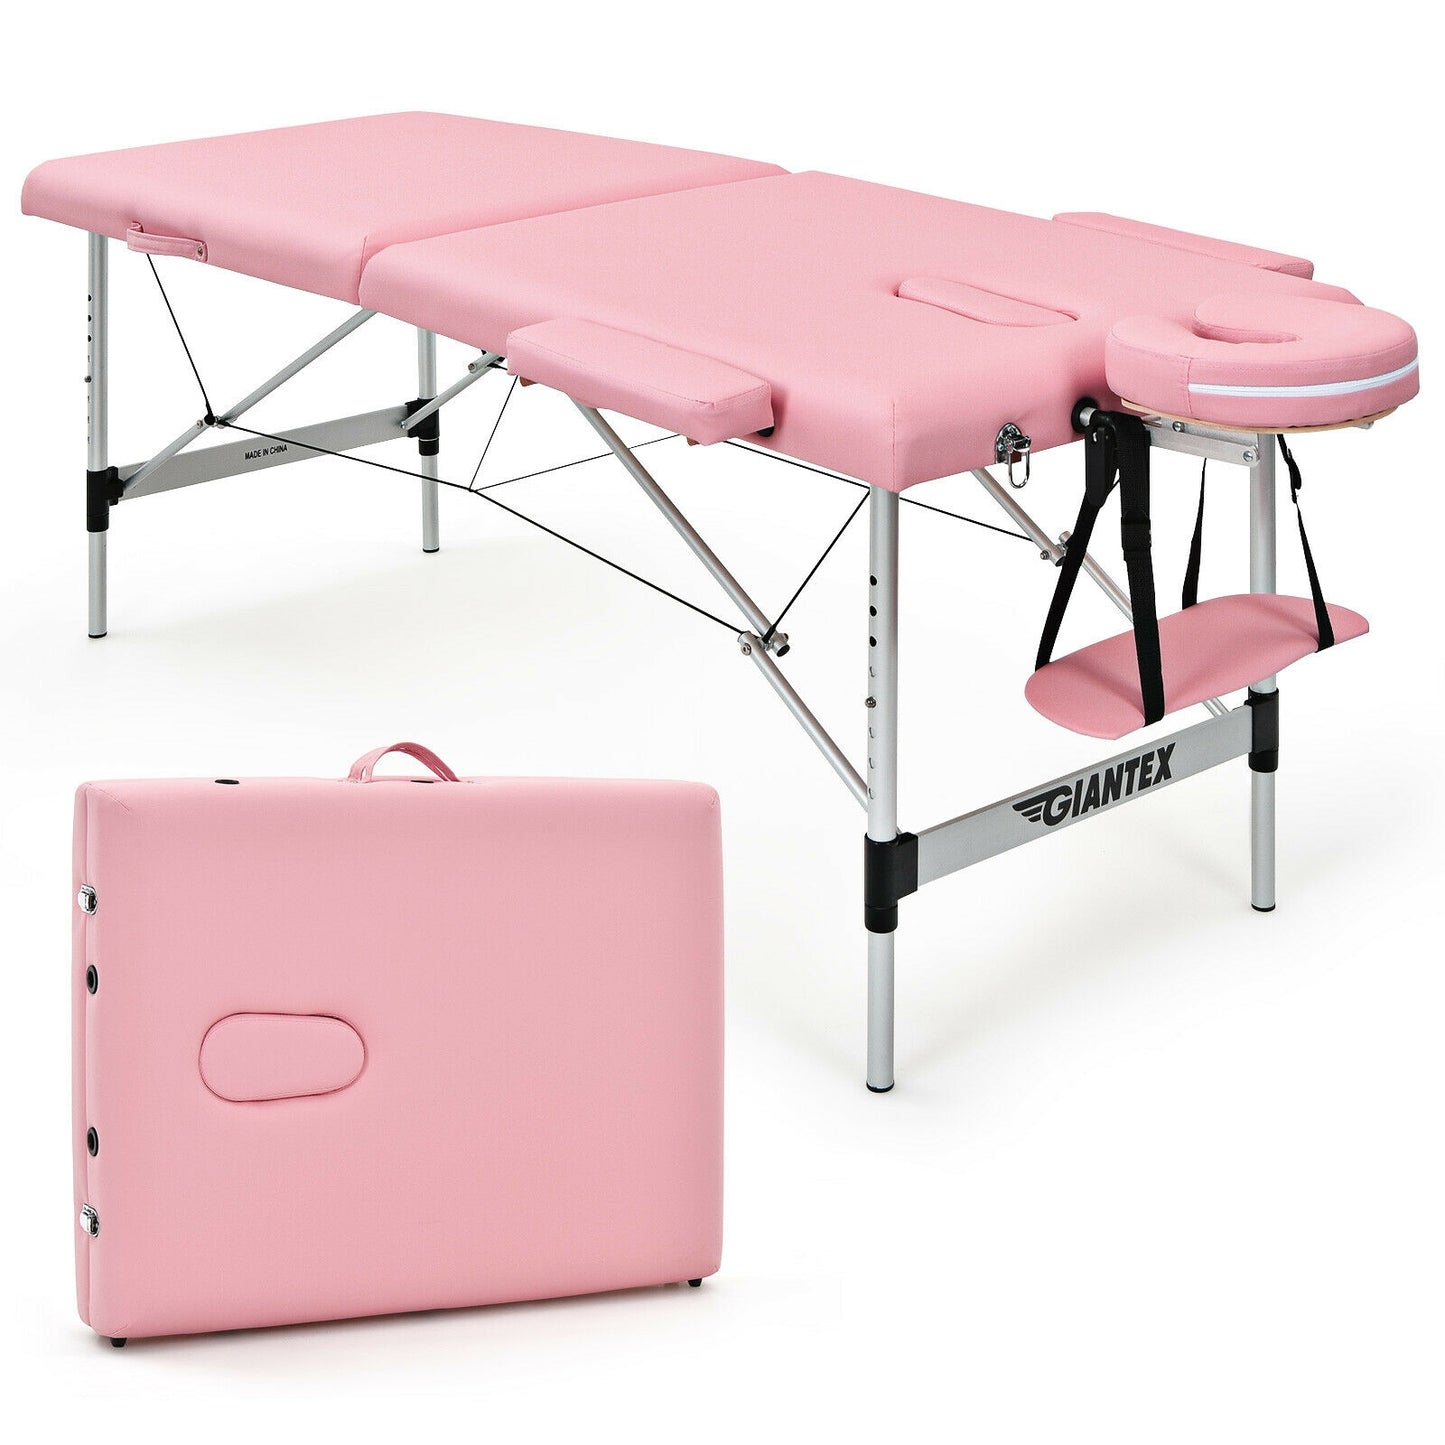 84 Inch L Portable Adjustable Massage Bed with Carry Case for Facial Salon Spa-Pink